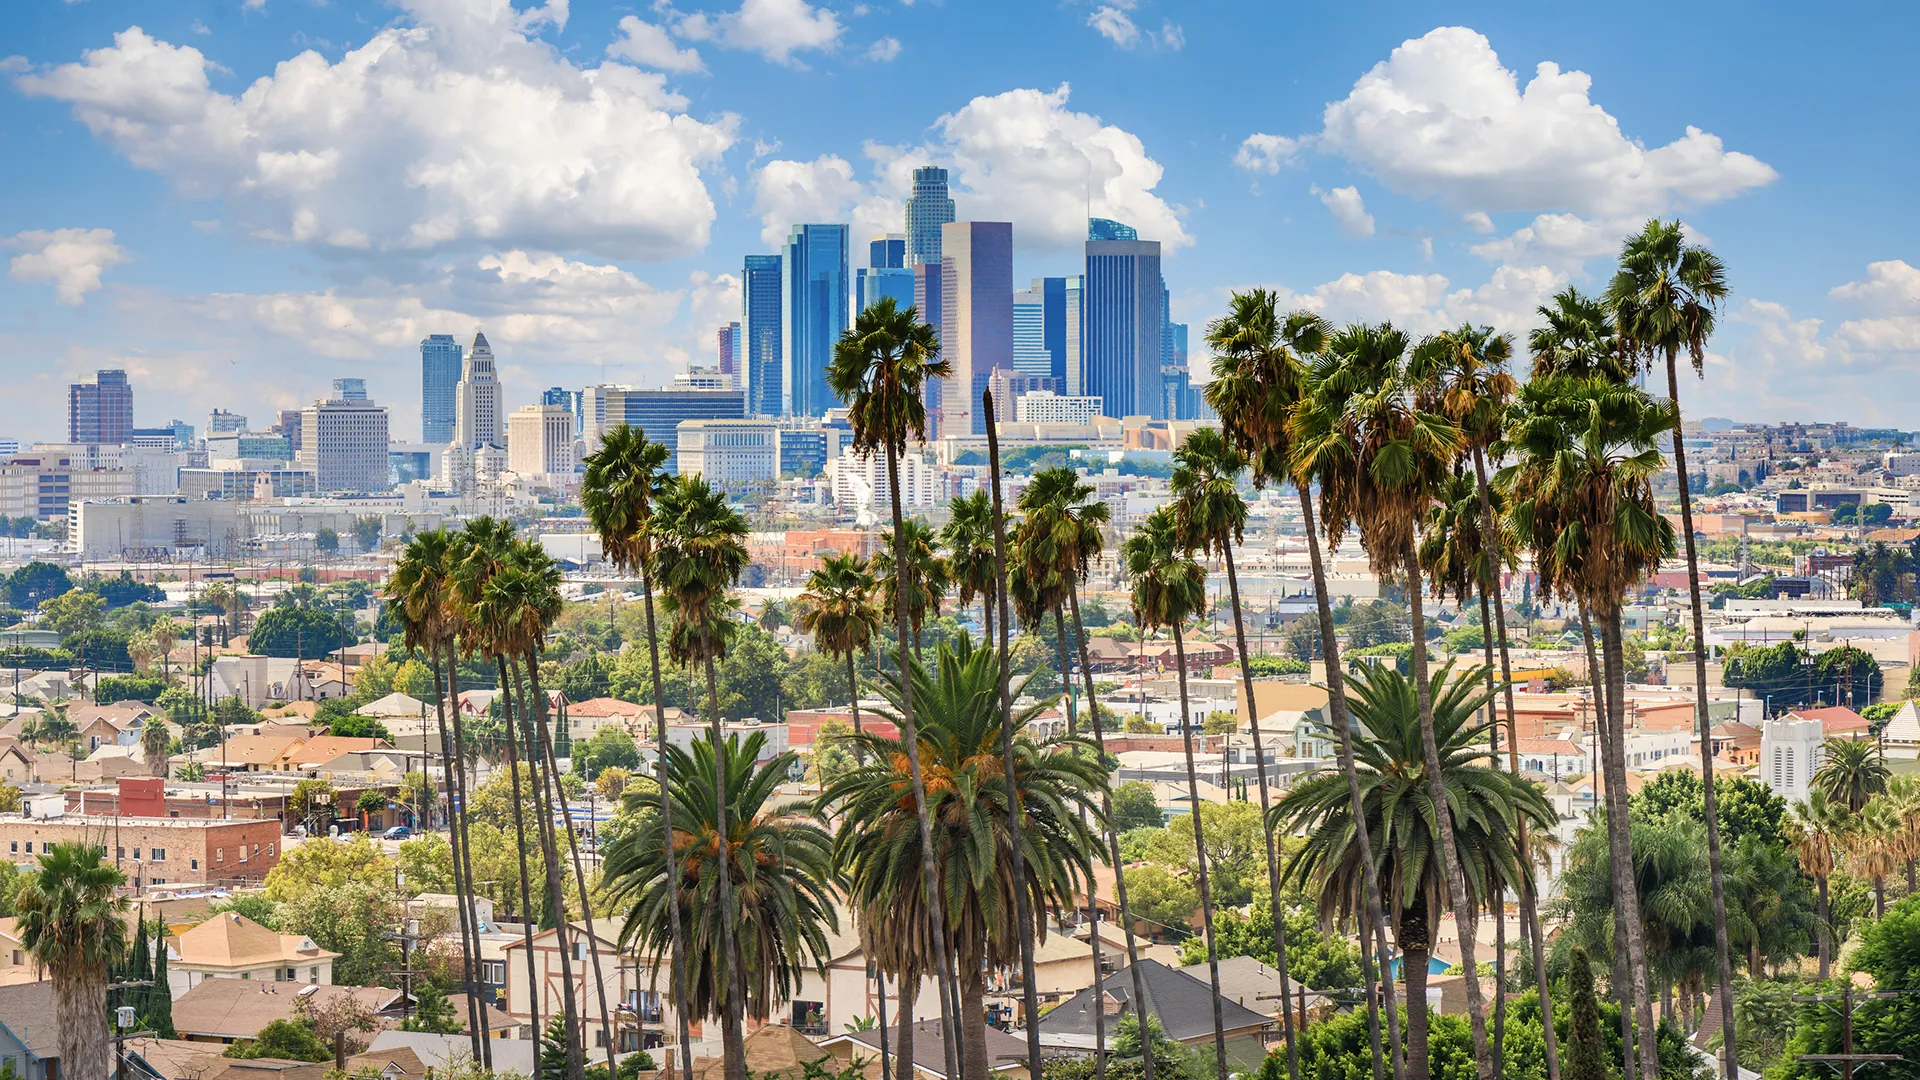 Beautiful cloudy day of Los Angeles downtown skyline and palm trees in foreground.